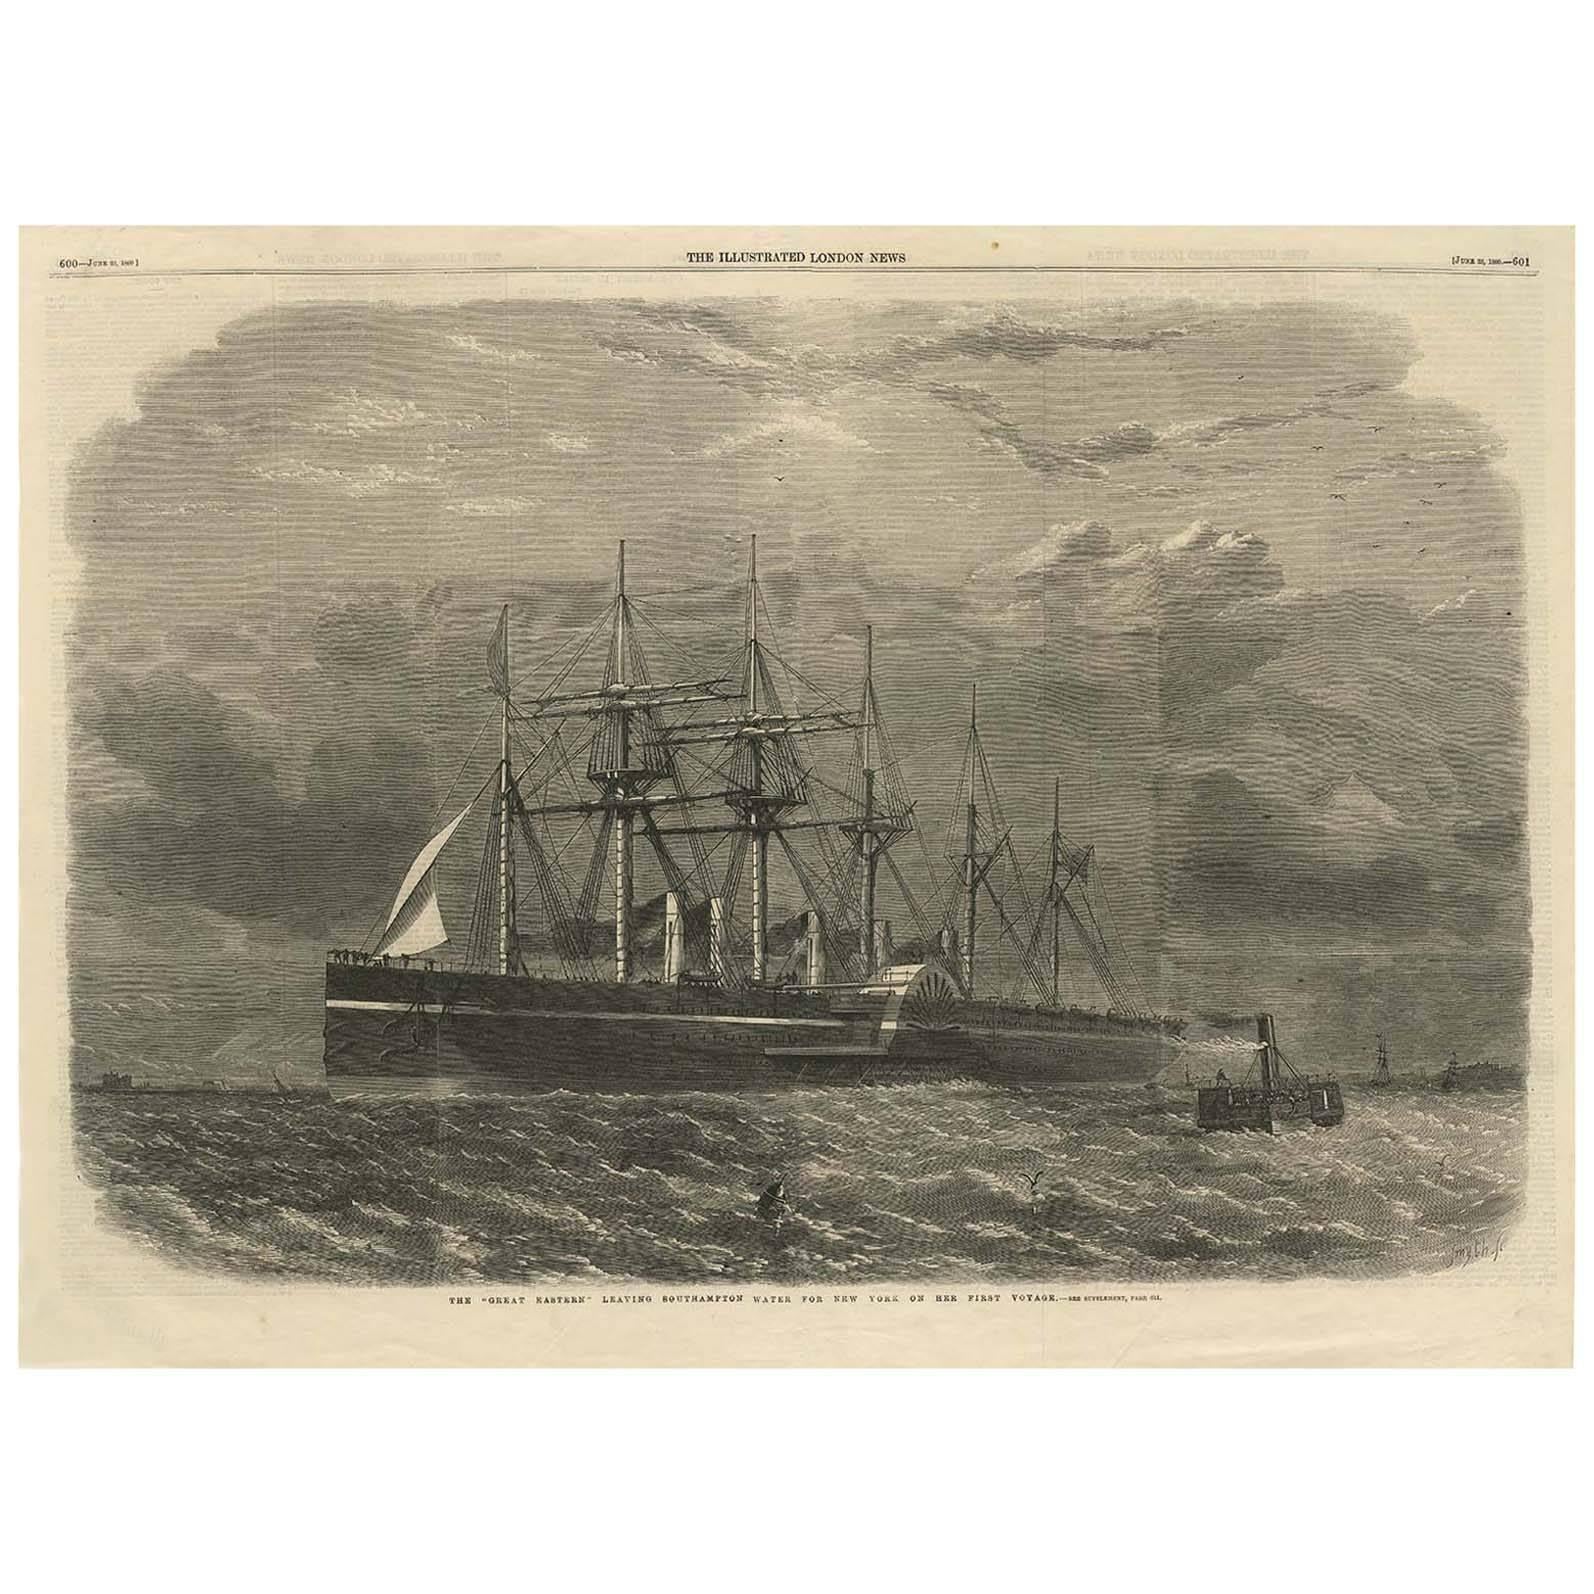 Antique Print of the Great Eastern Leaving Southampton Water for New York, 1860